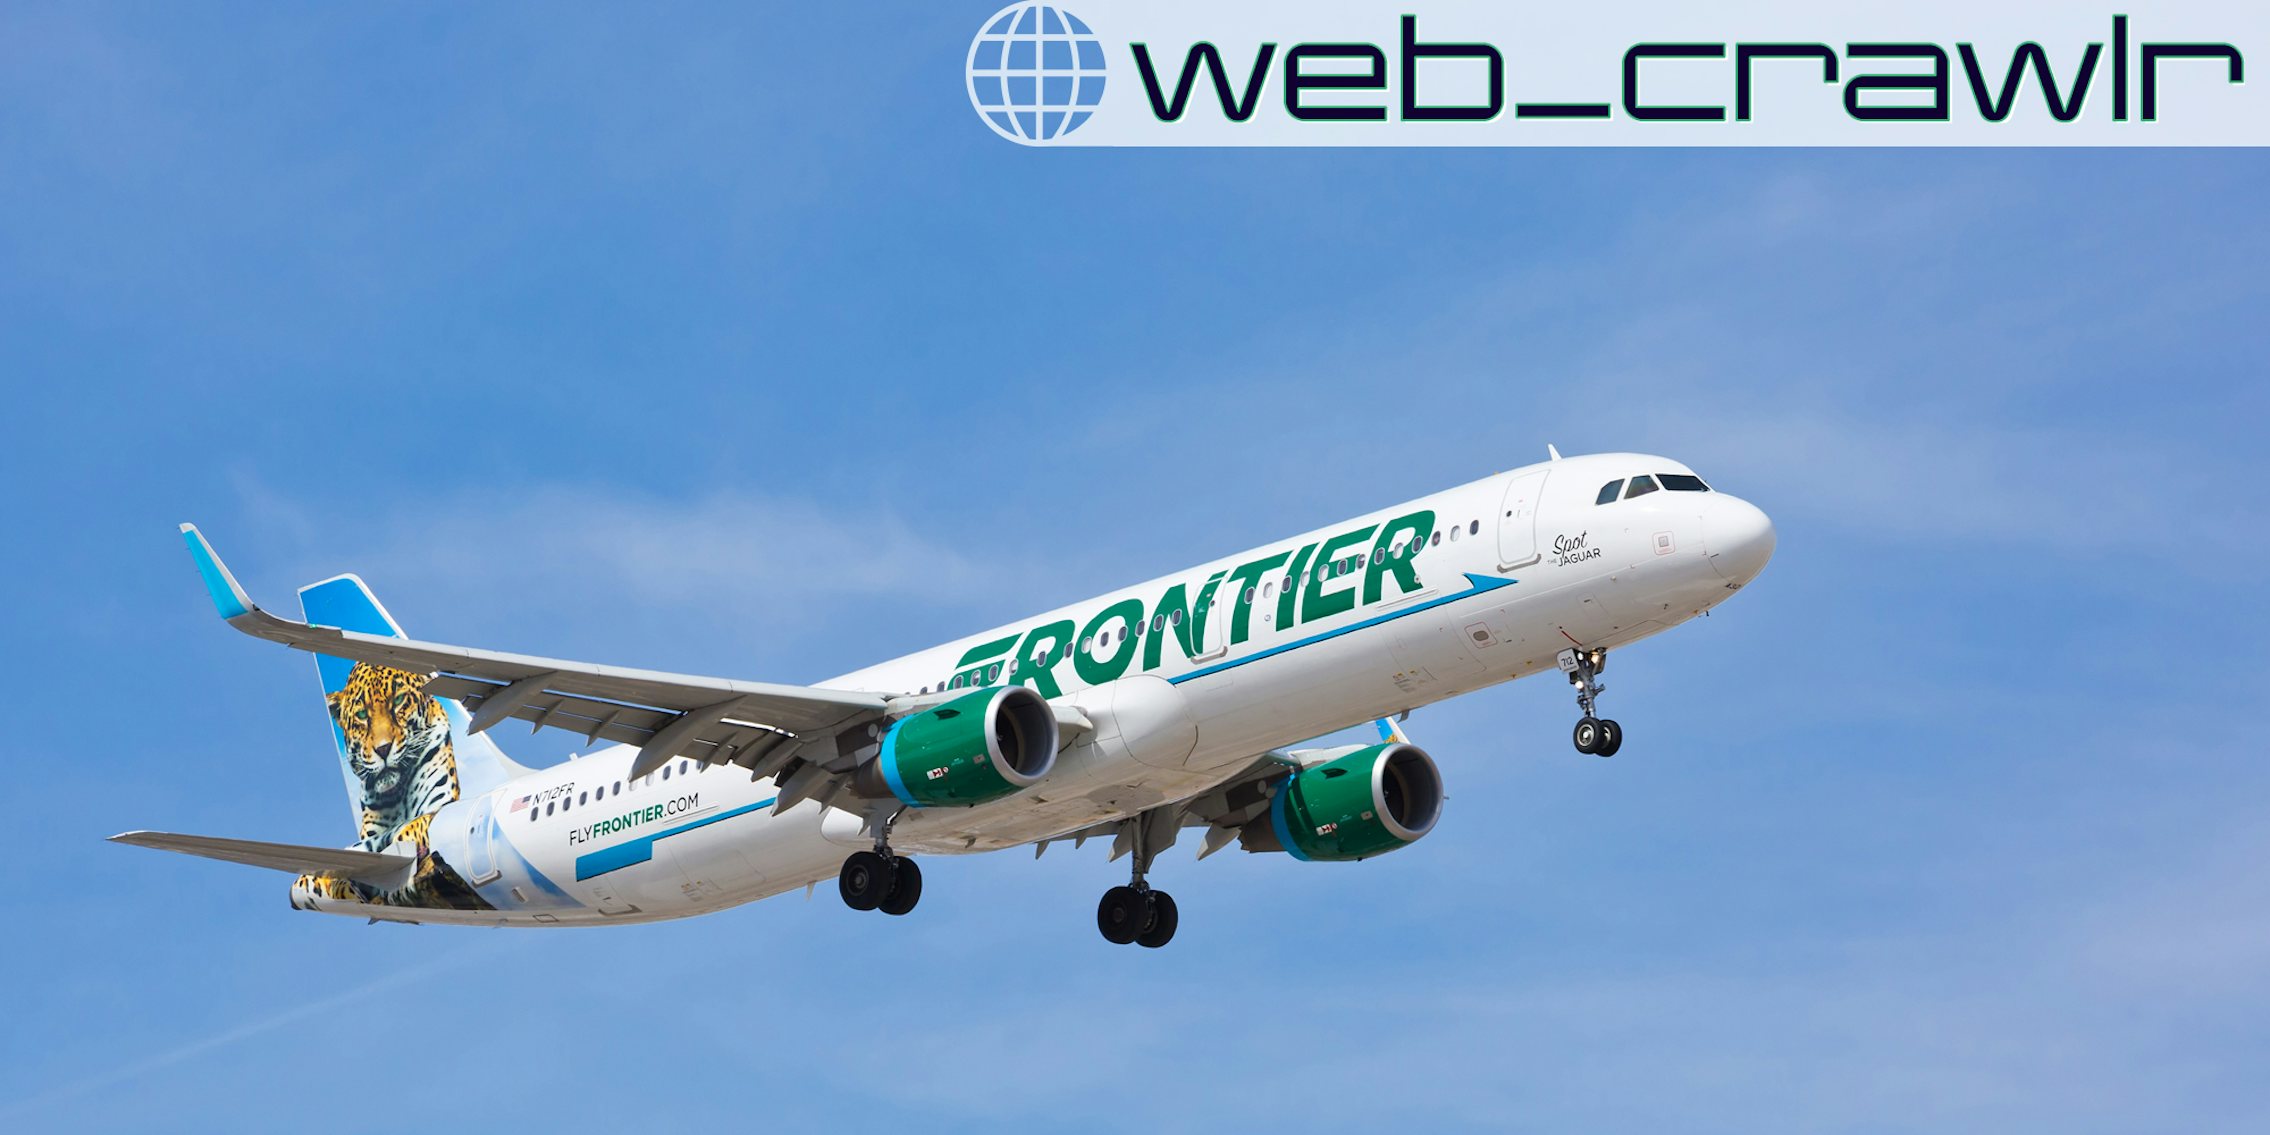 A Frontier Airlines jet. The Daily Dot newsletter web_crawlr logo is in the top right corner.